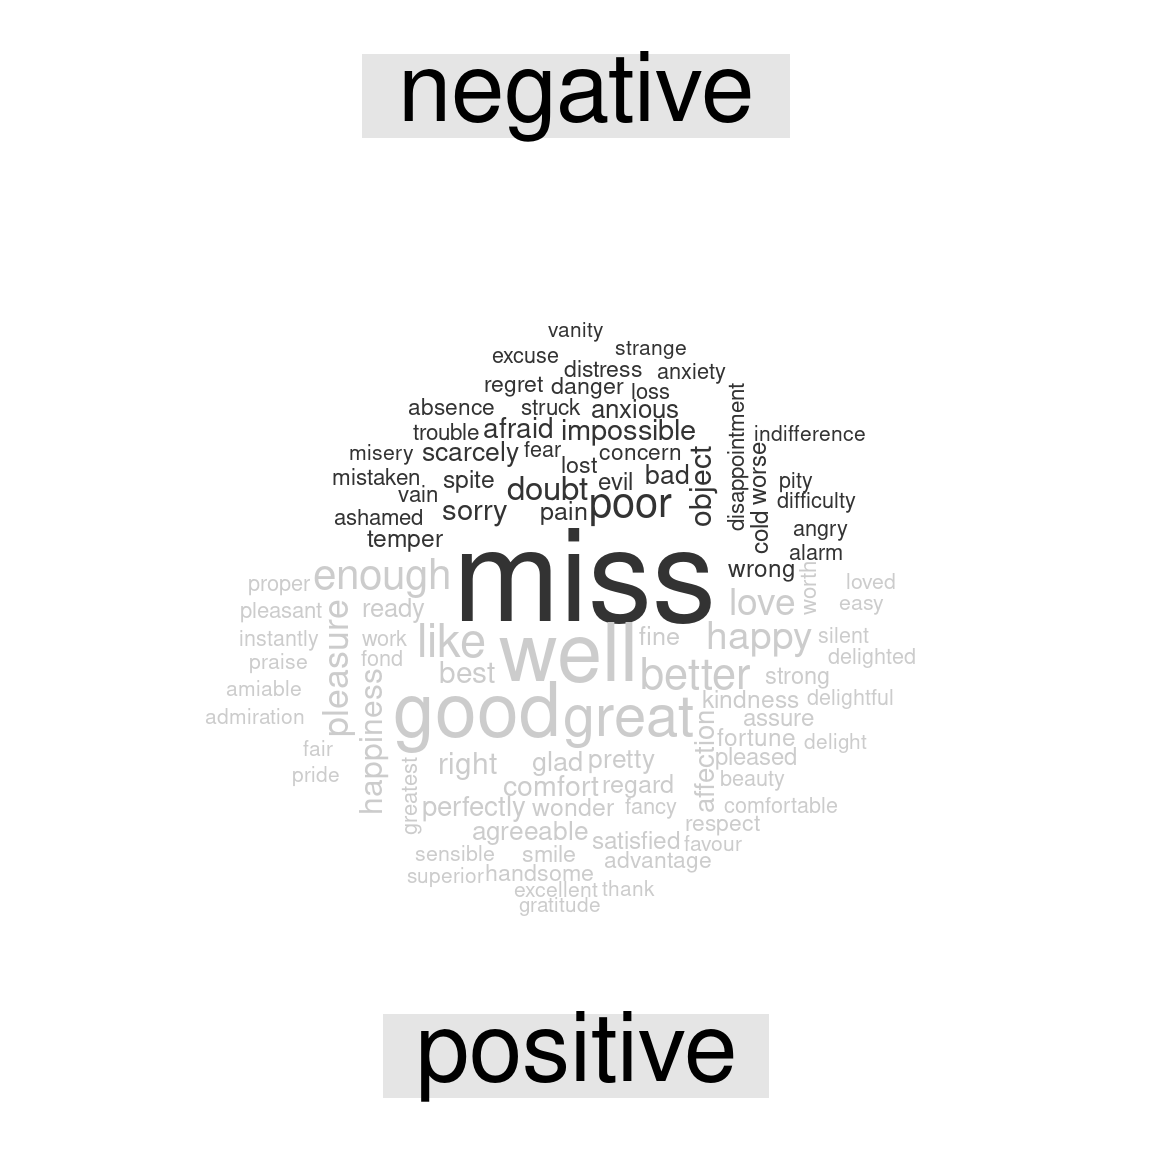 Most common positive and negative words in Jane Austen's novels